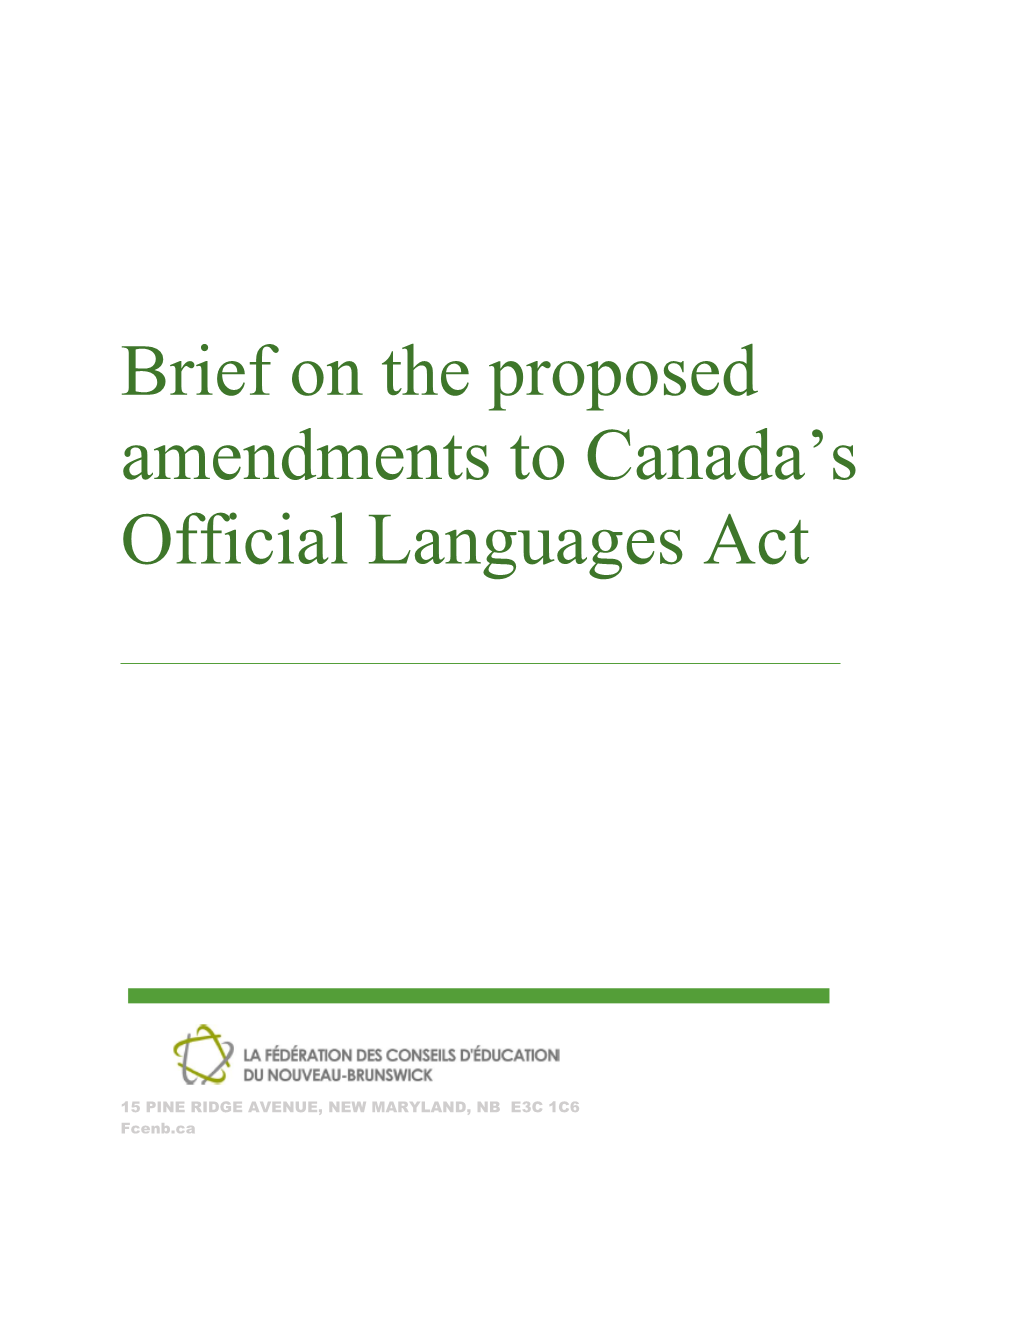 Brief on the Proposed Amendments to Canada's Official Languages